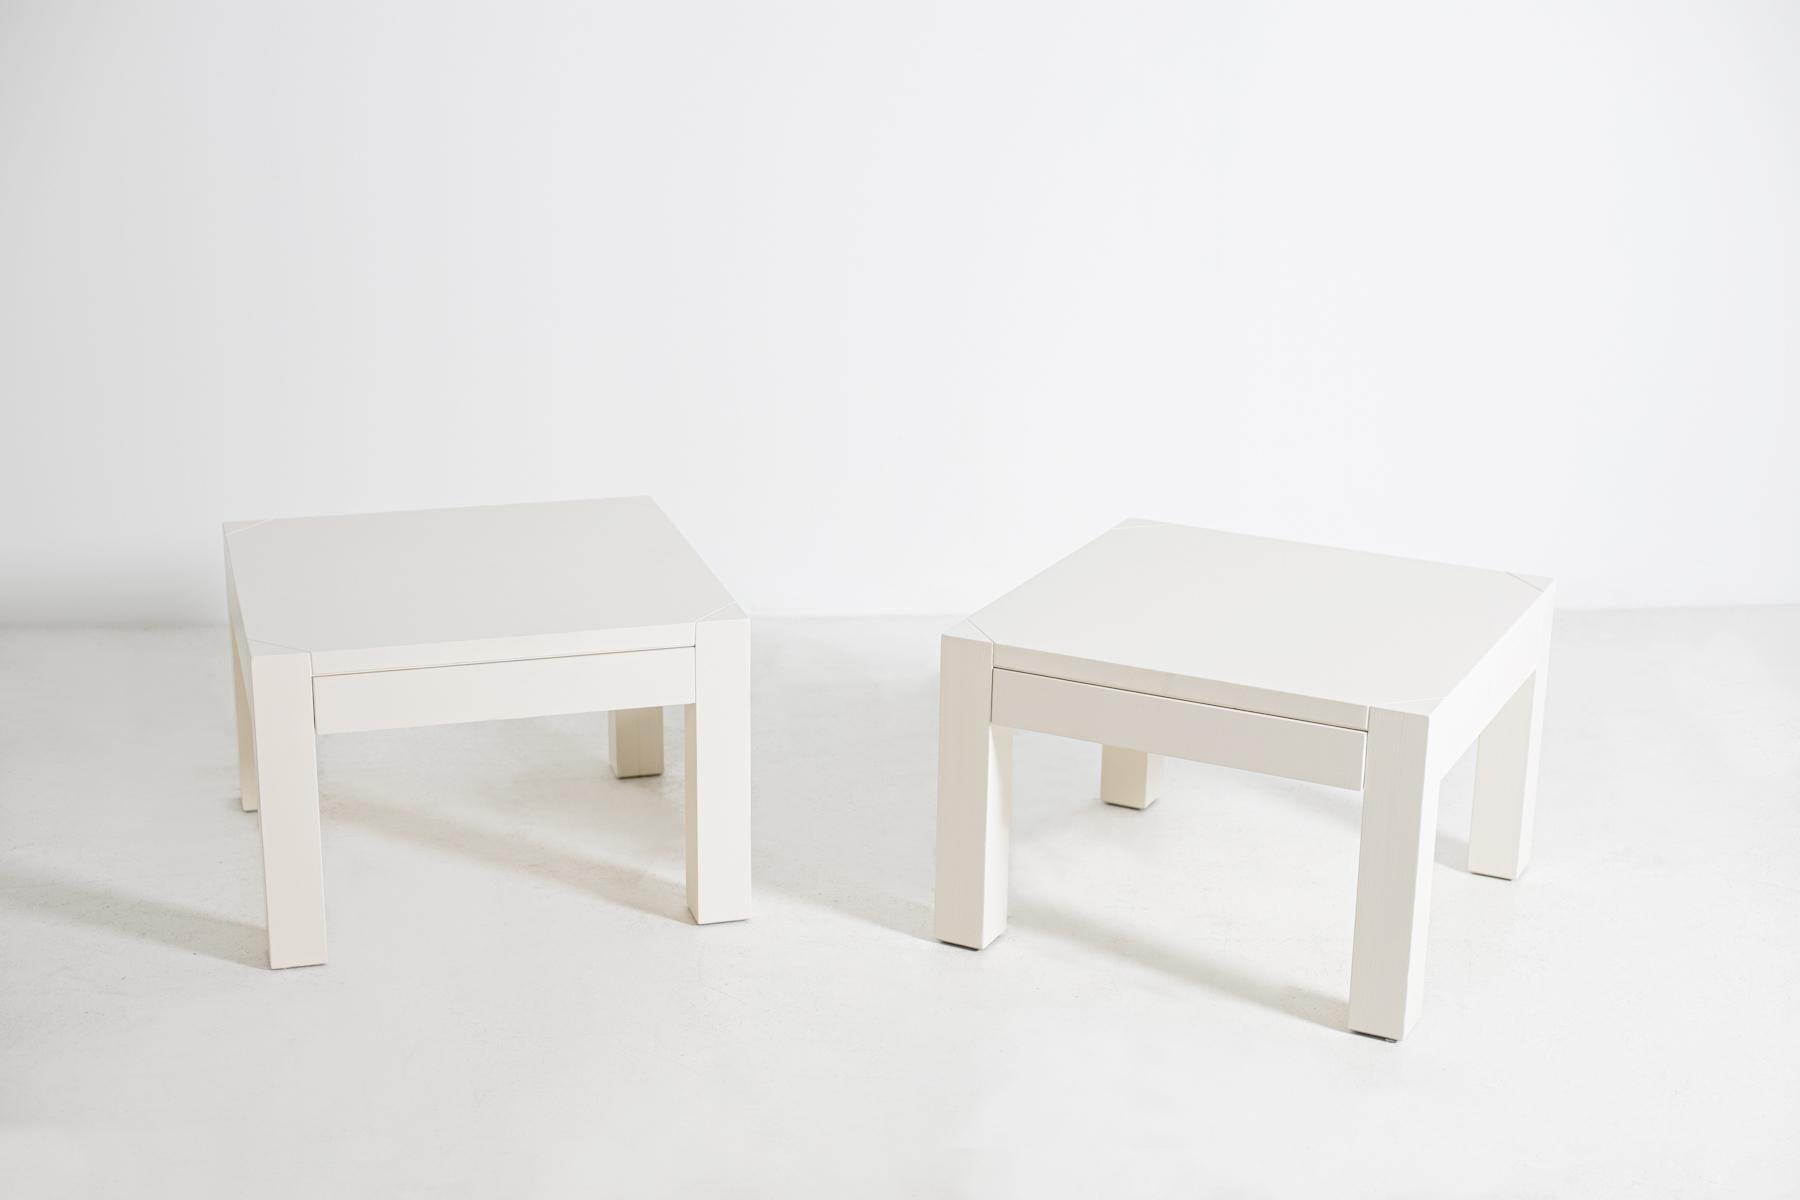 Modern pair of bedside tables made by Pierluigi Ghianda to a design by Gae Aulenti, 1970s. The bedside tables are made of white painted wood. Their purity and essentiality make them a furnishing element not noisy, but with an elegant and clean